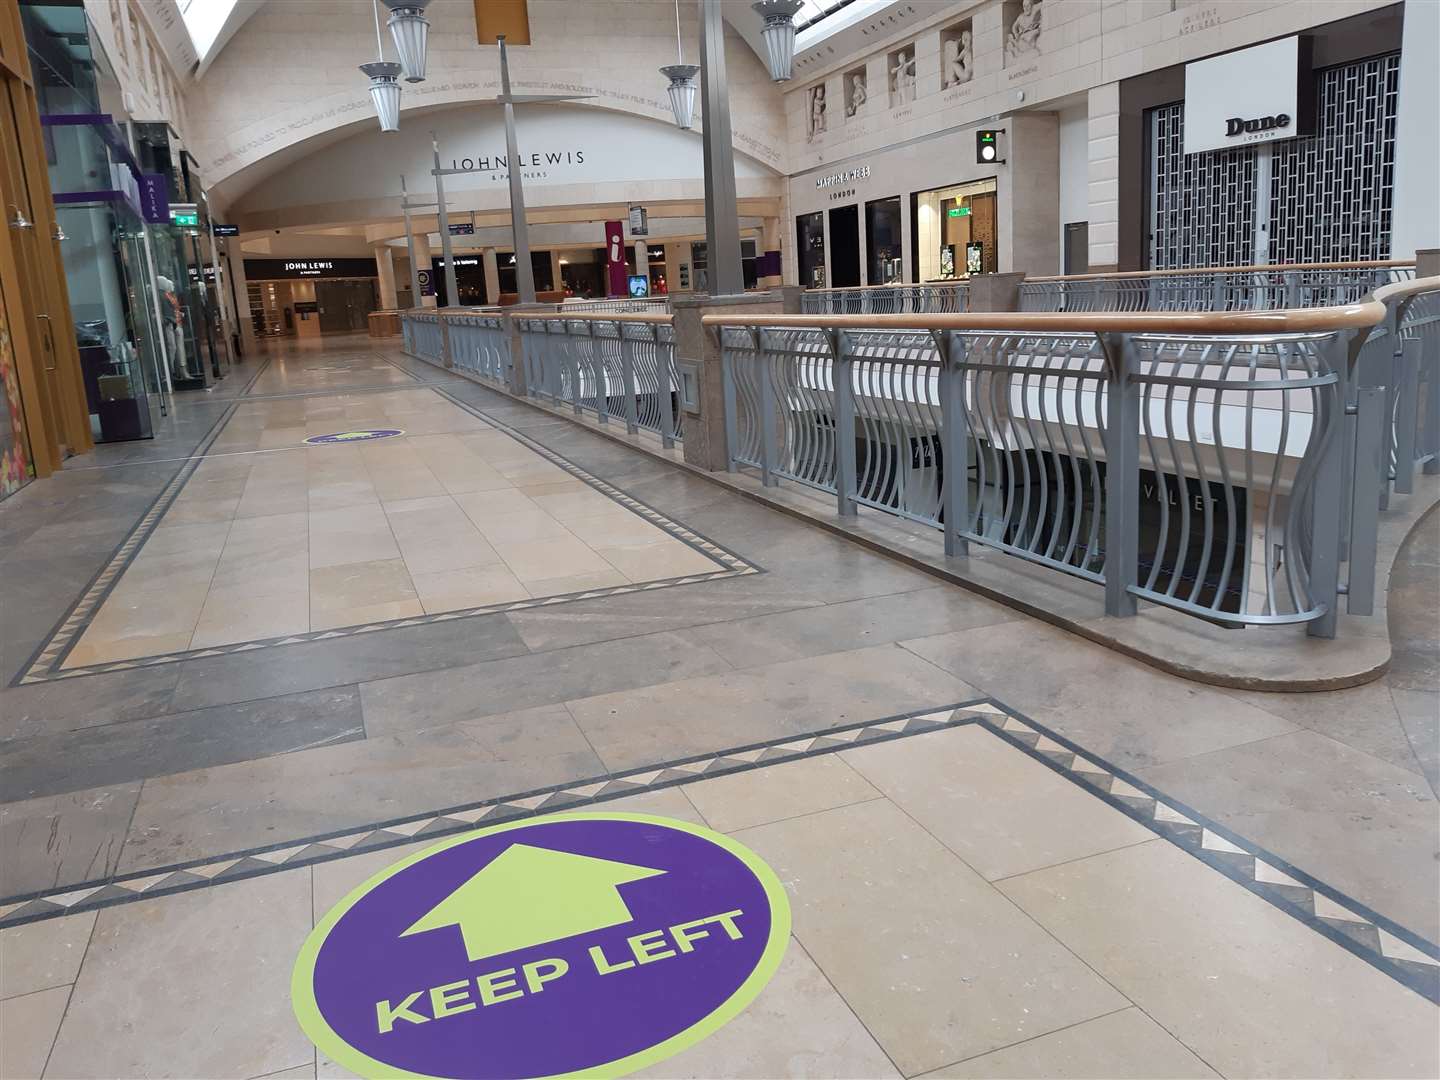 Signs at Bluewater shopping centre taken ahead of re-opening of non-essential shops. Covid-19 stock